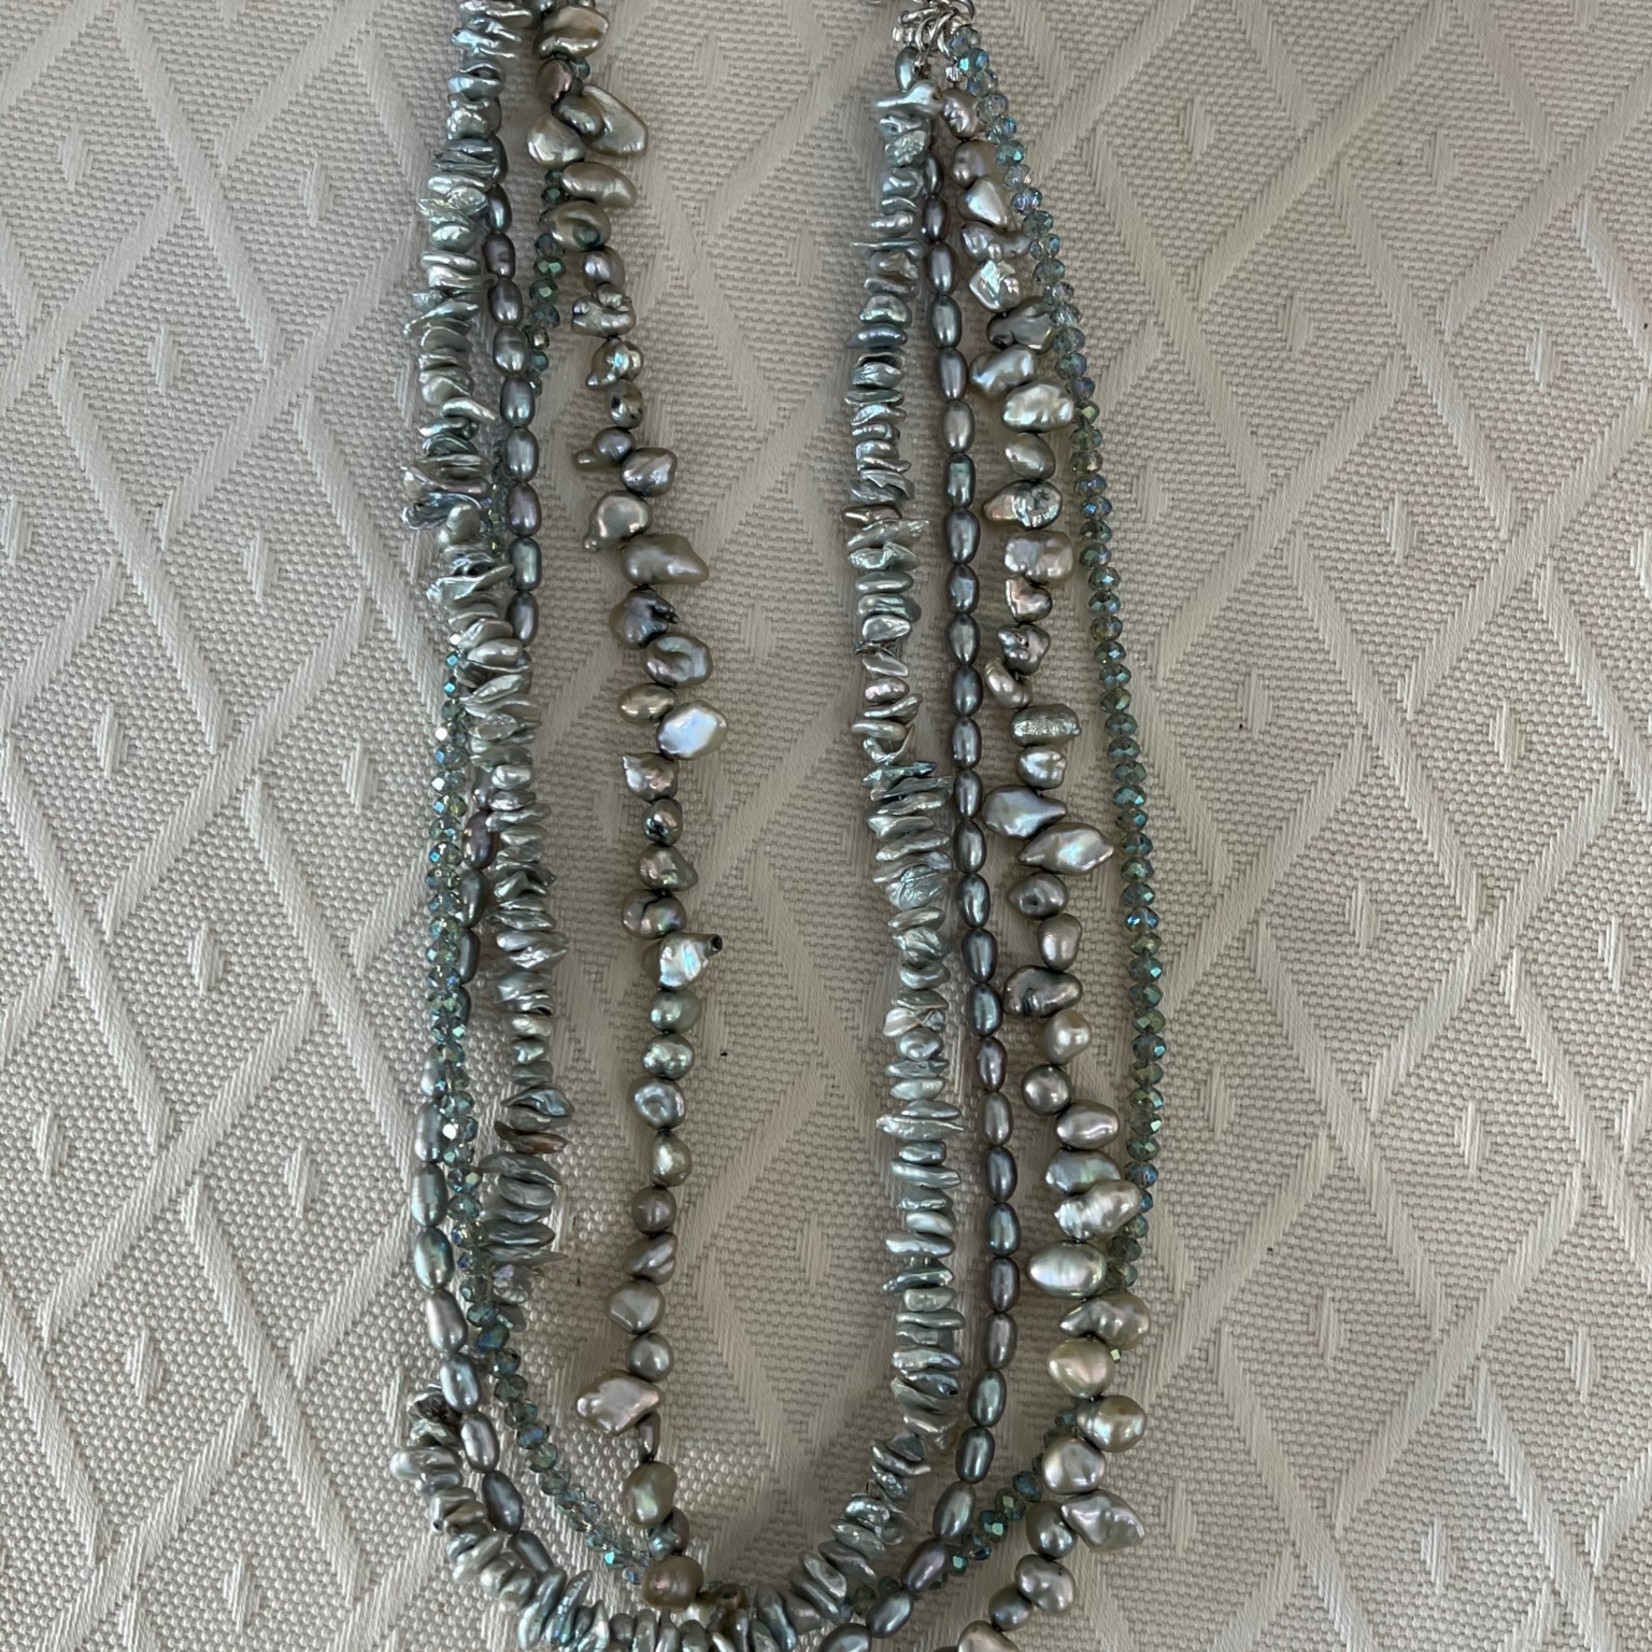 Rare Finds NECKLACE, blue/green fresh water pearls, Swarovski crystals, sterling, 4 strand , 16", RARE